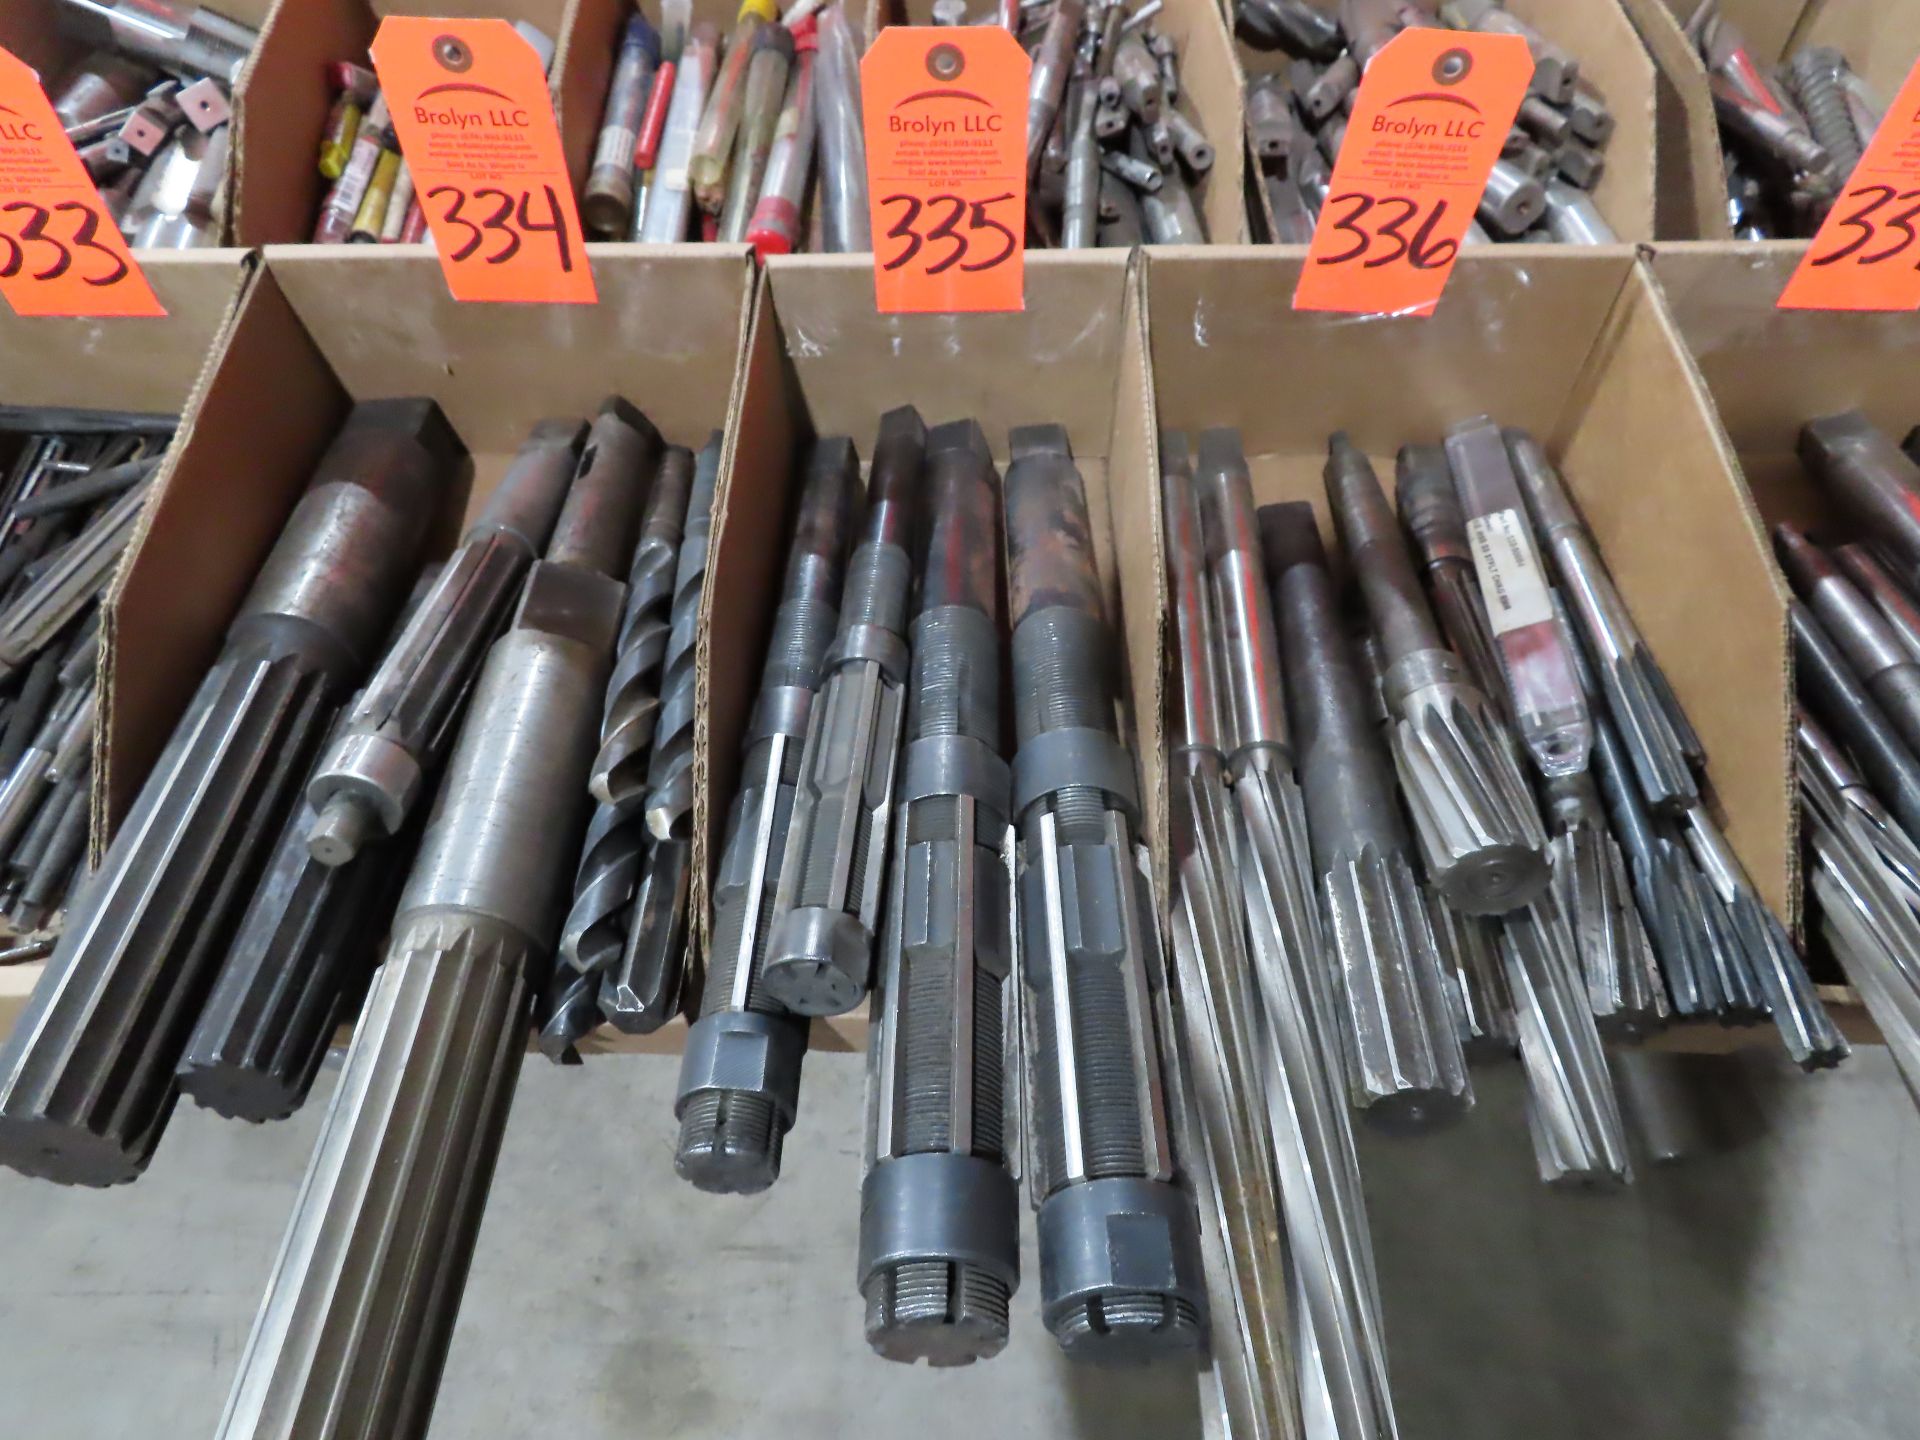 Large quantity of new reamers and/or drills. Most are new. This lot can be picked up onsite with